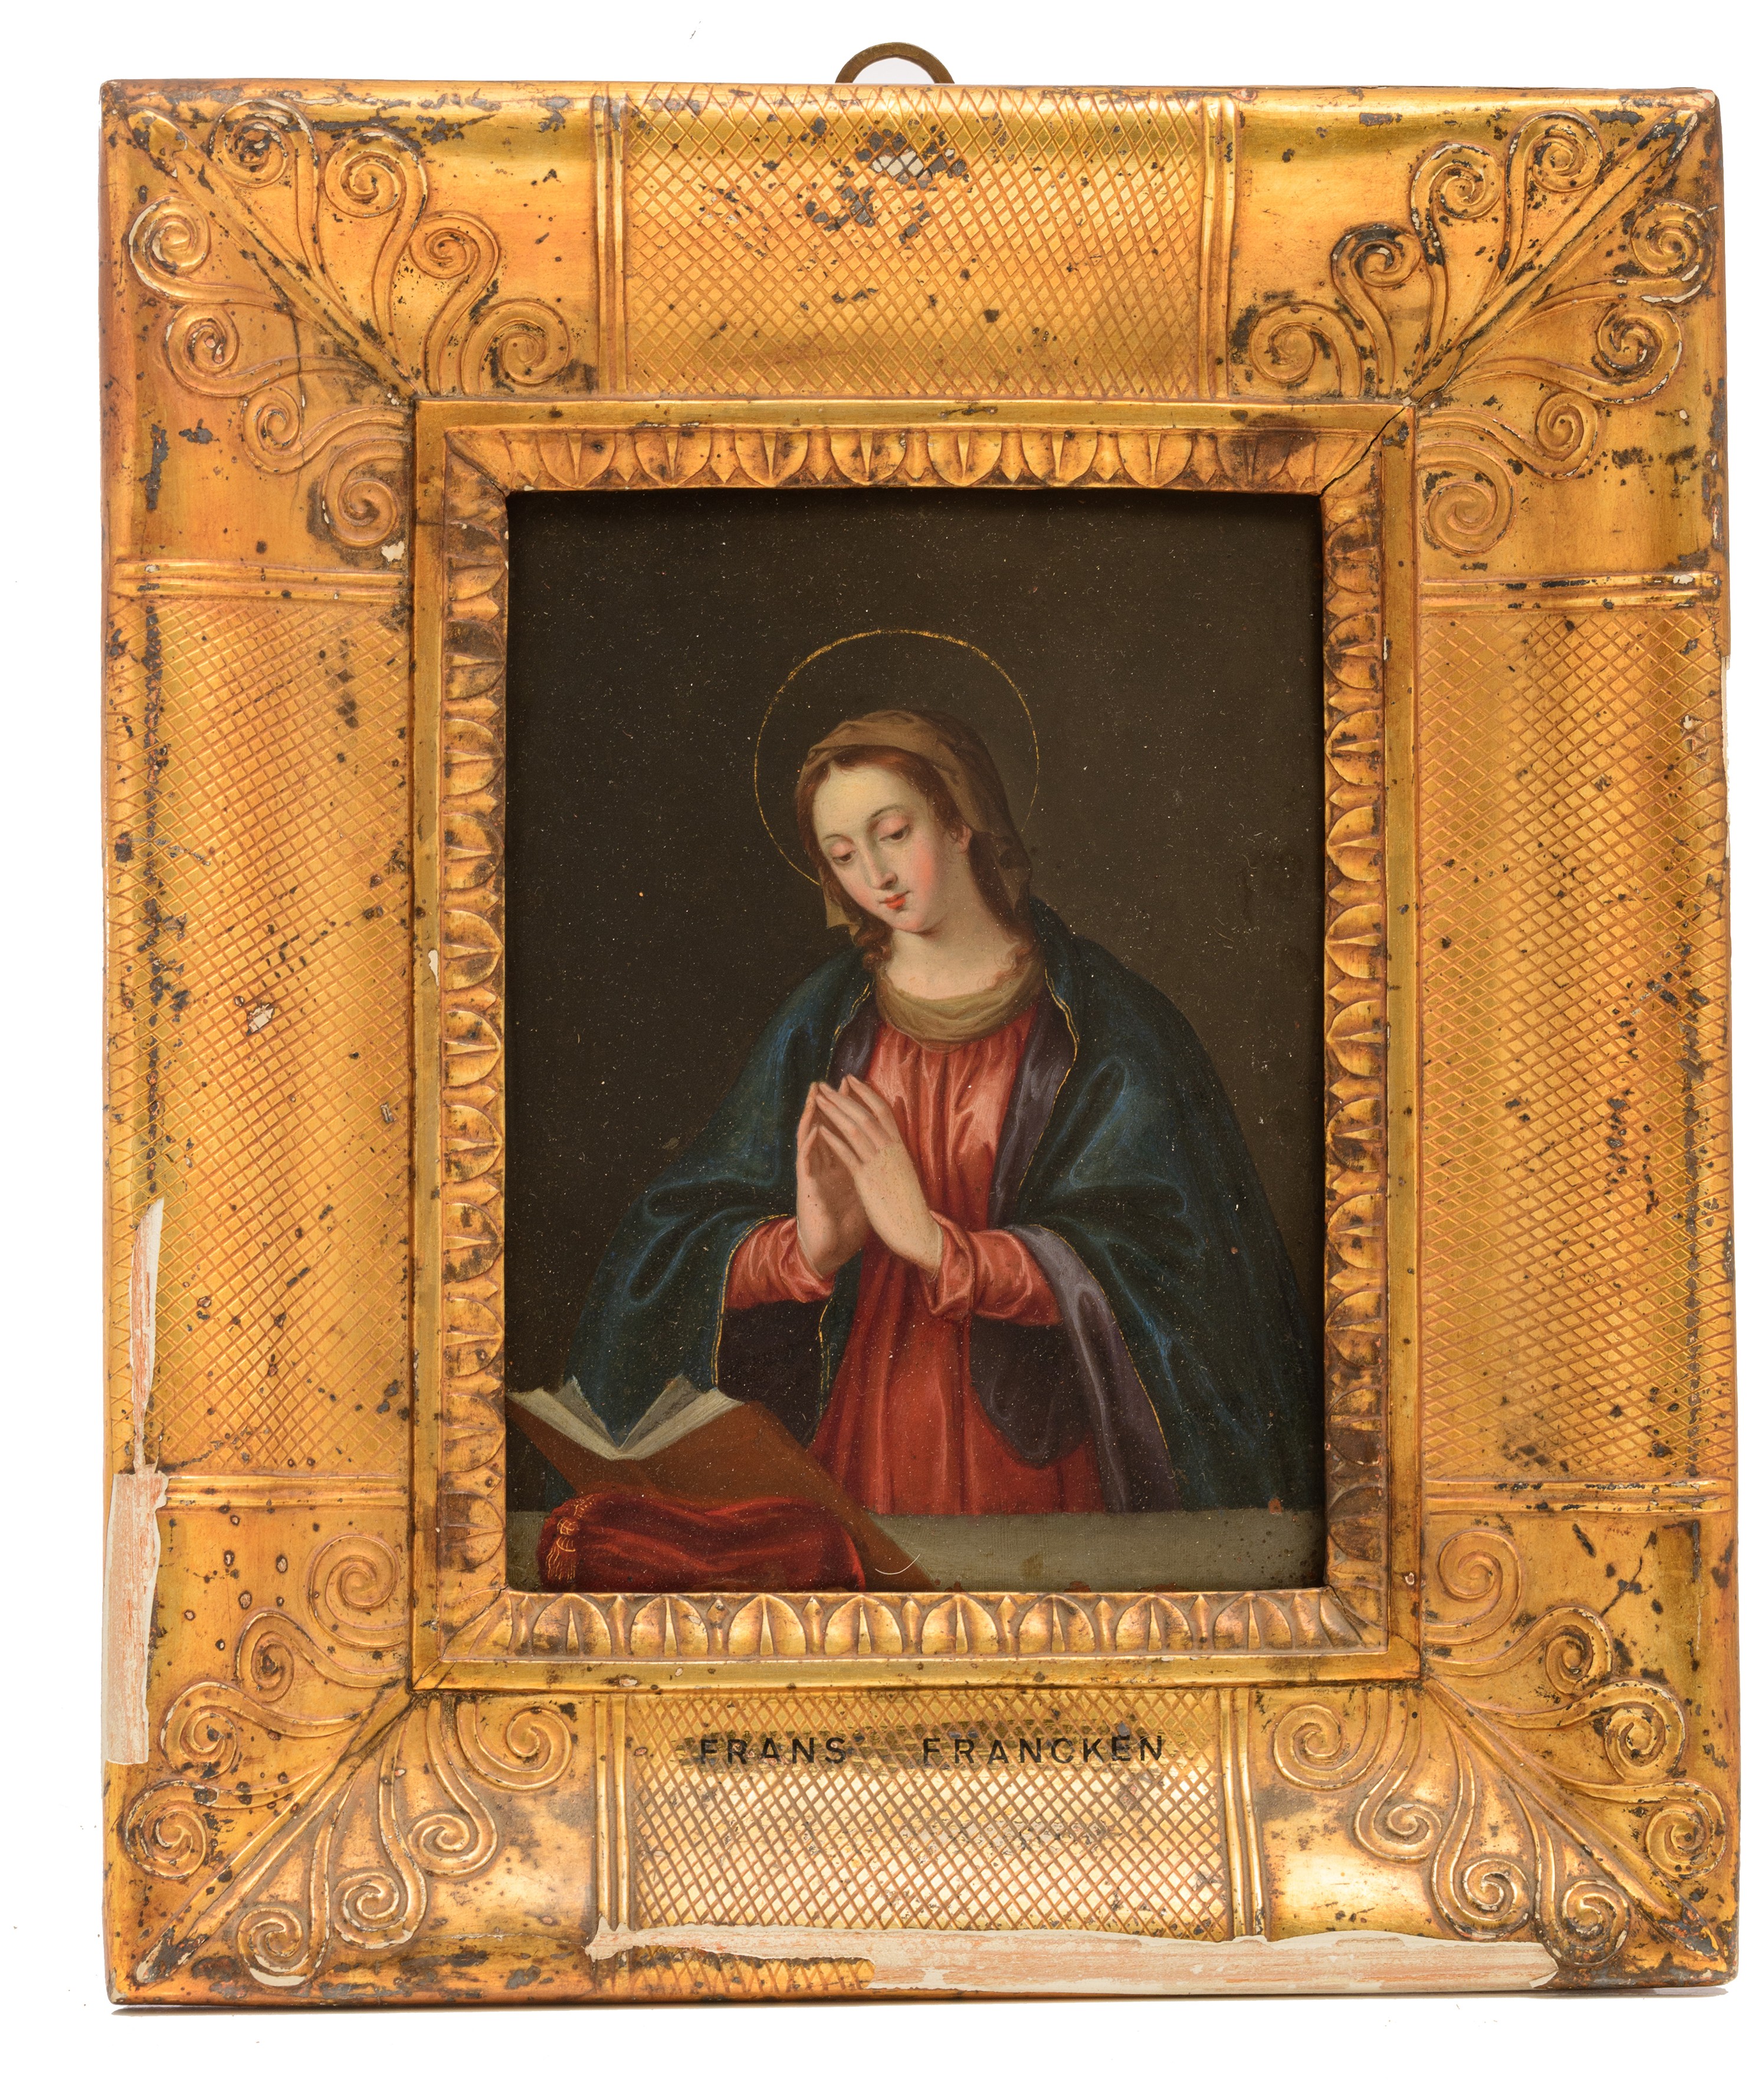 The Holy Madonna praying, probably 17thC, oil on copper, 13,5 x 18 cm - Image 9 of 14